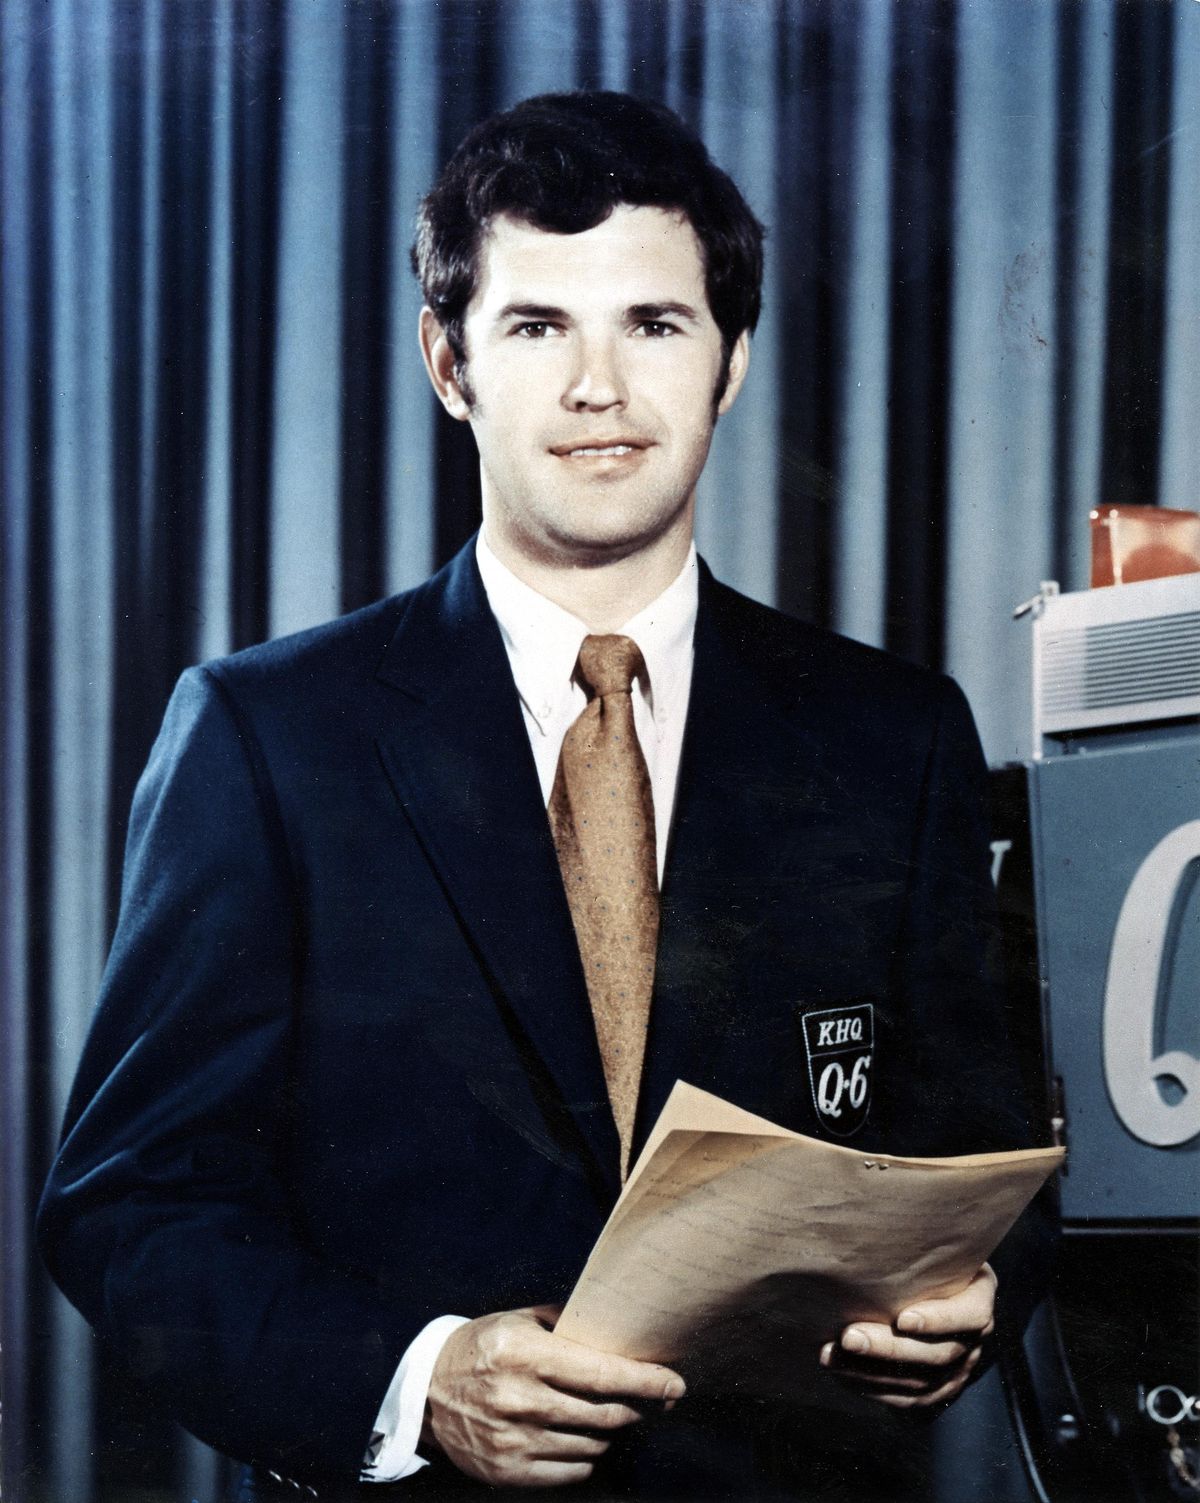 Ed  Sharman, former sports director at KHQ, died Monday evening at the age of 78.